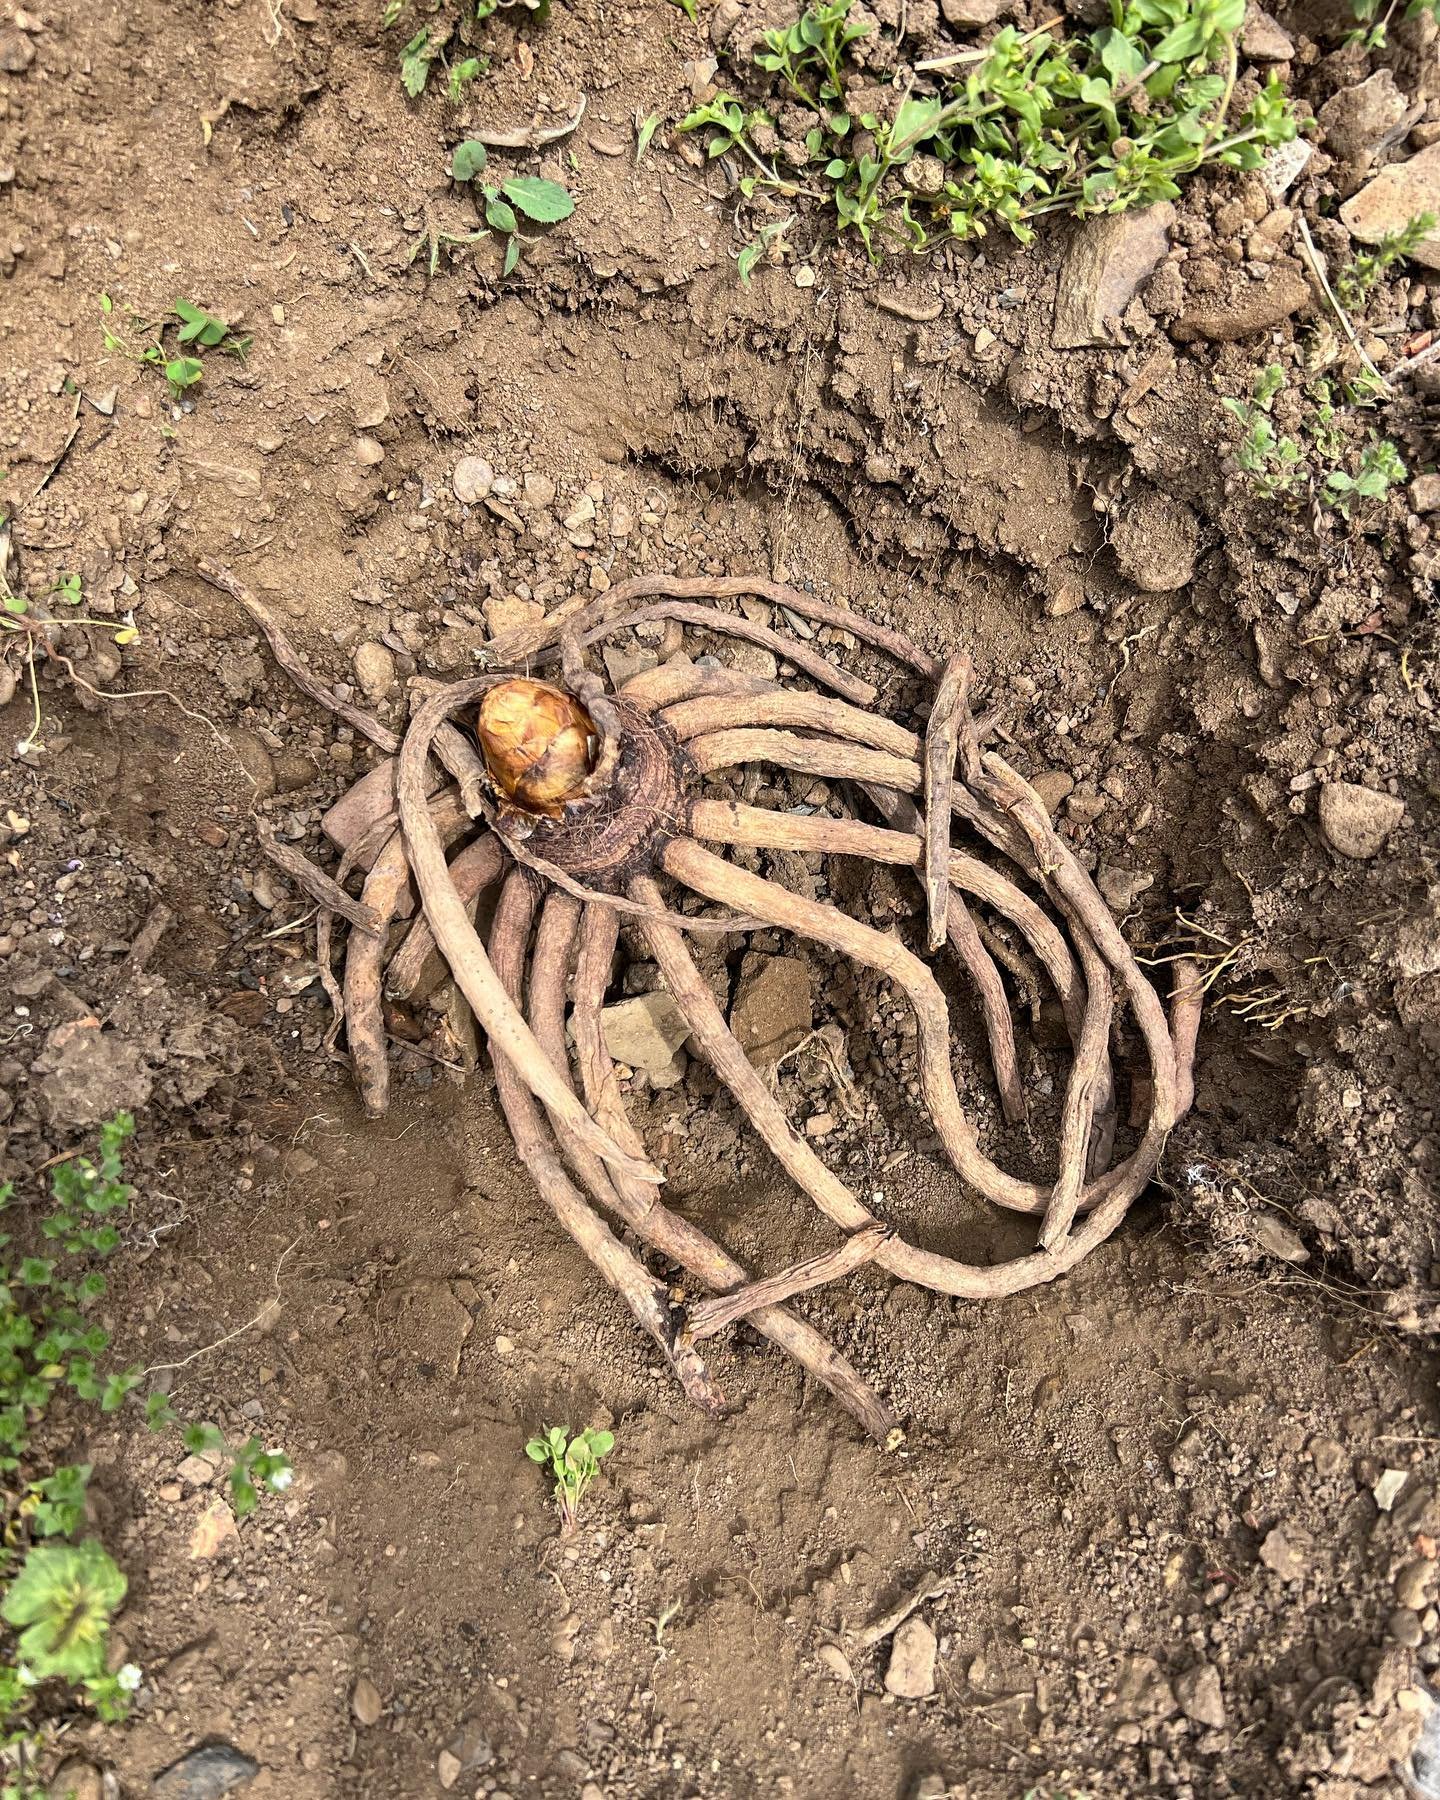 First @bloomfieldpgh market of the season is #tomorrow . And today we&rsquo;re planting octopi.

Harvest was finished in record time. Leaving time for @_lindzard and I to get a good amount of field work done. Over the years, we&rsquo;ve bonded over o